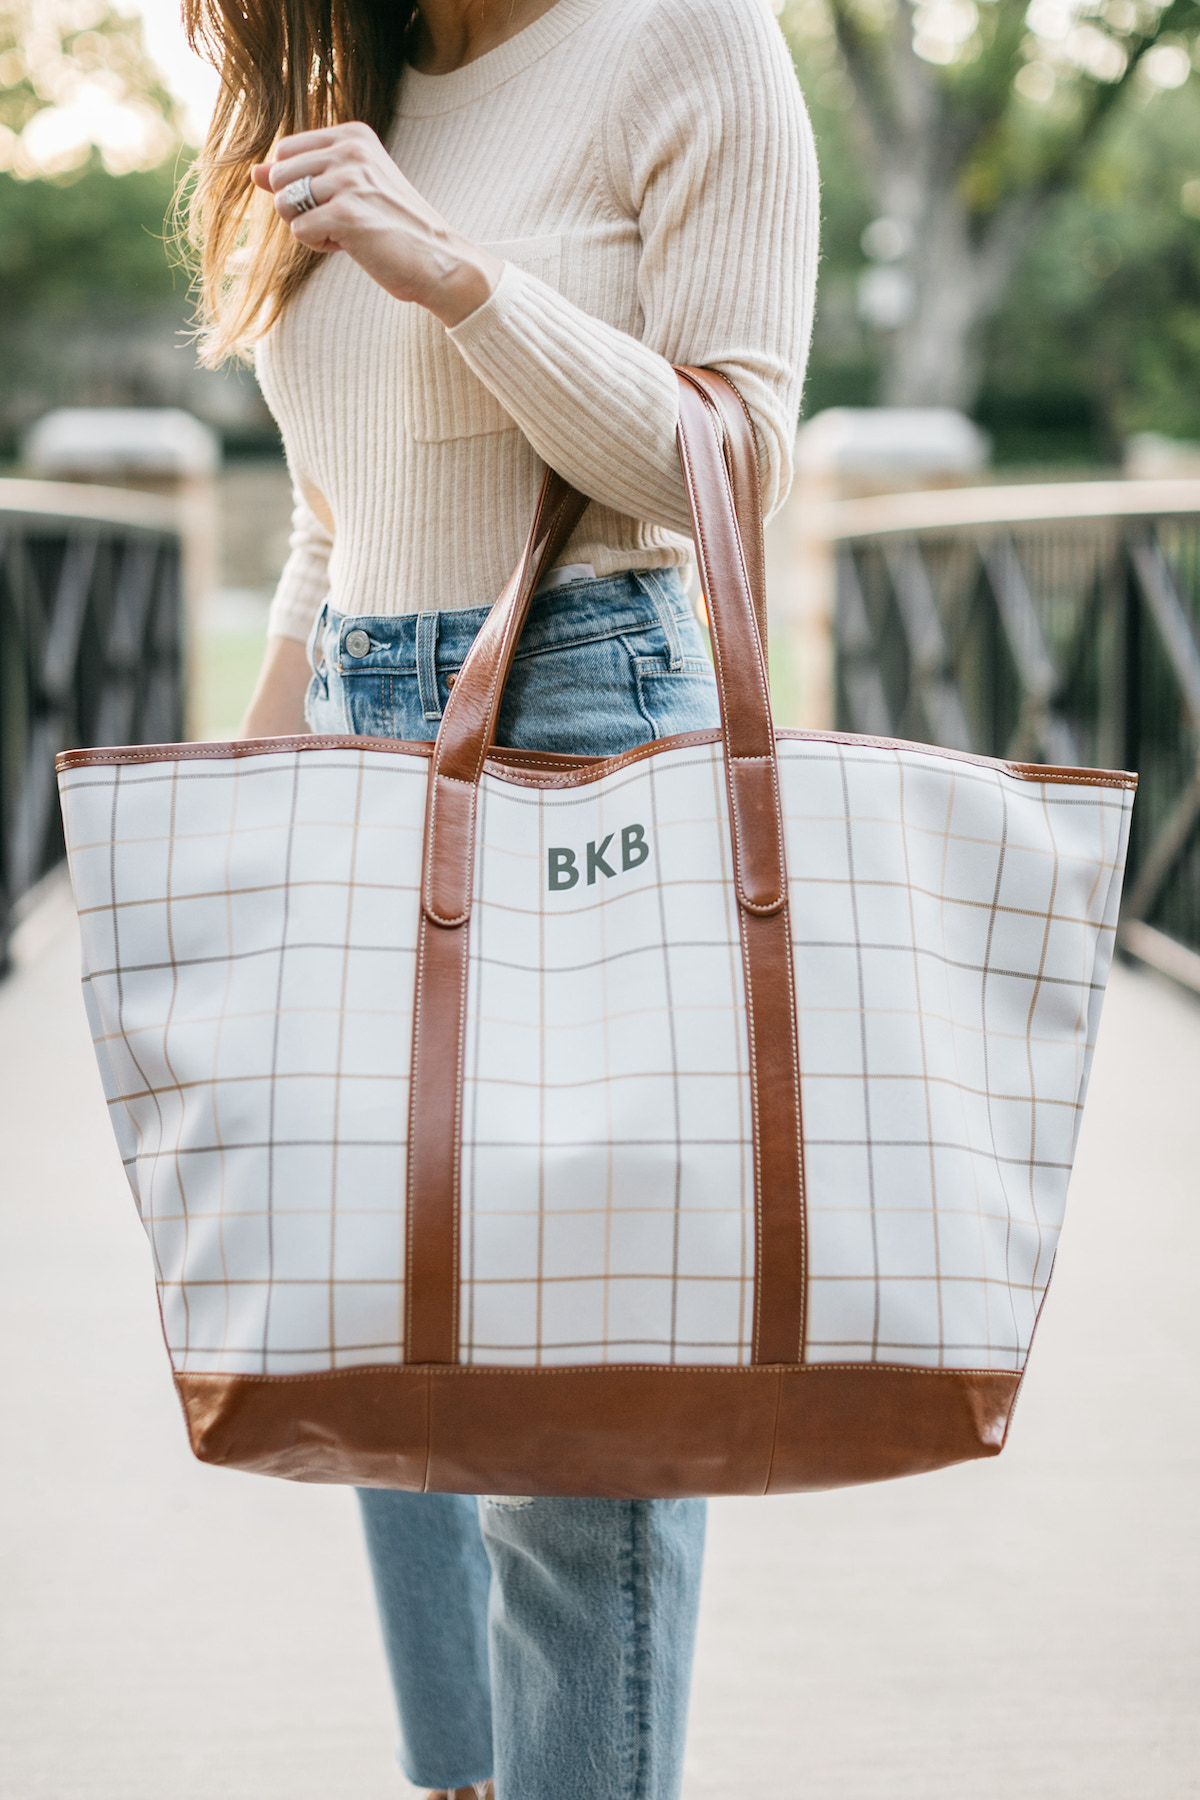 Brighton Butler Barrington tote catch all bag st Charles tote